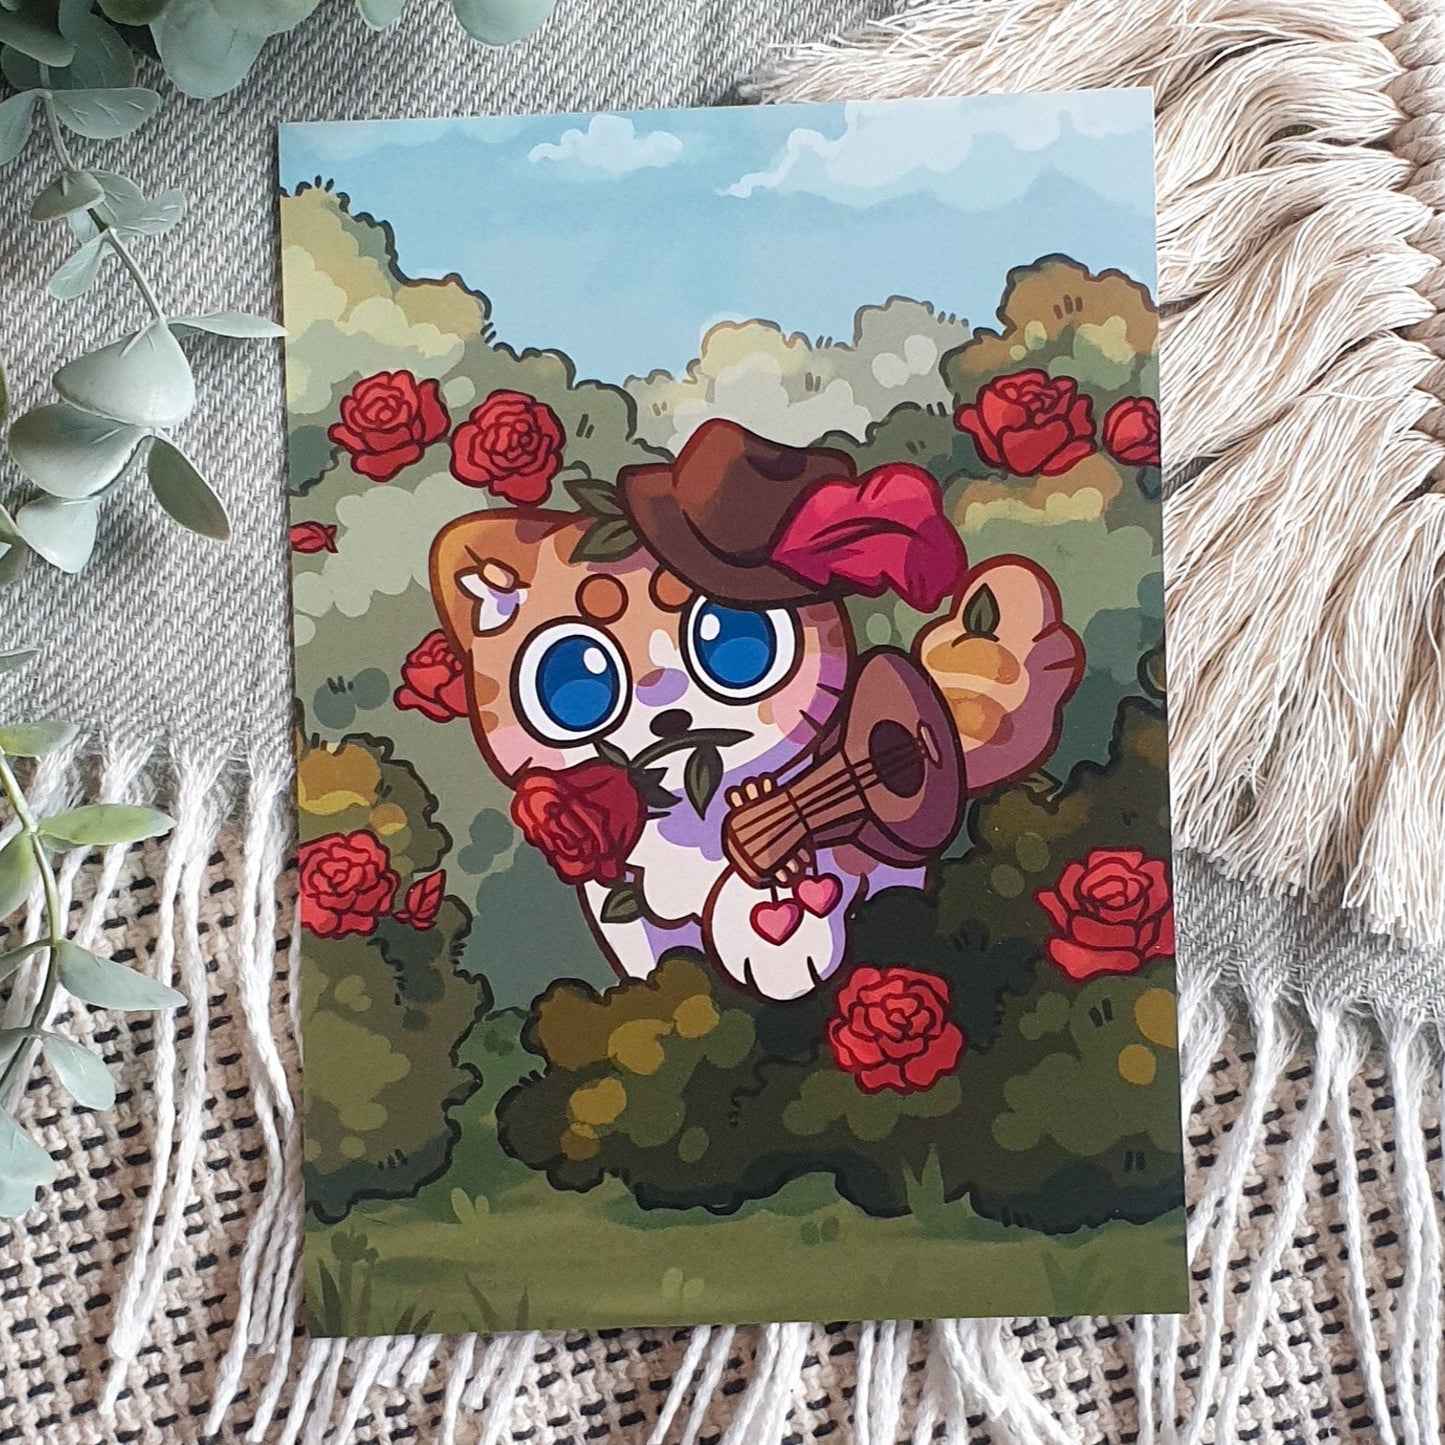 D&D Bards and Roses Art print